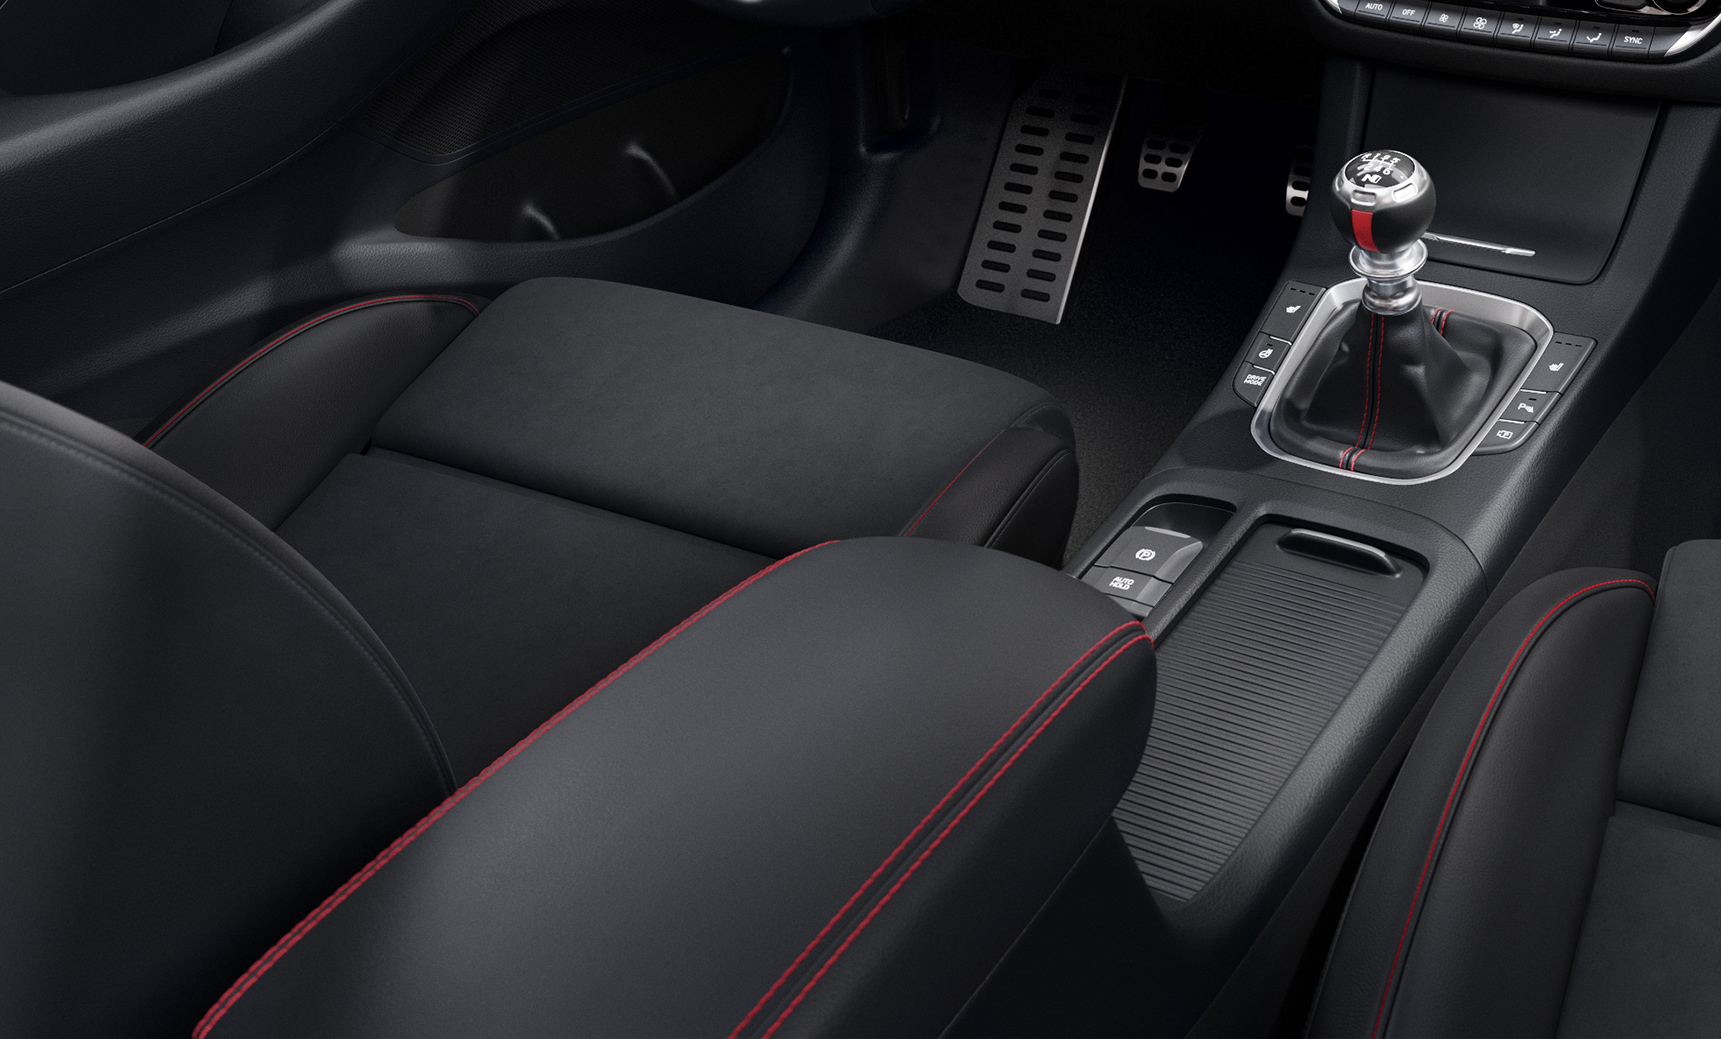 Close-up of the red accent stitching in the new Hyundai i30 N Line Fastback interior.